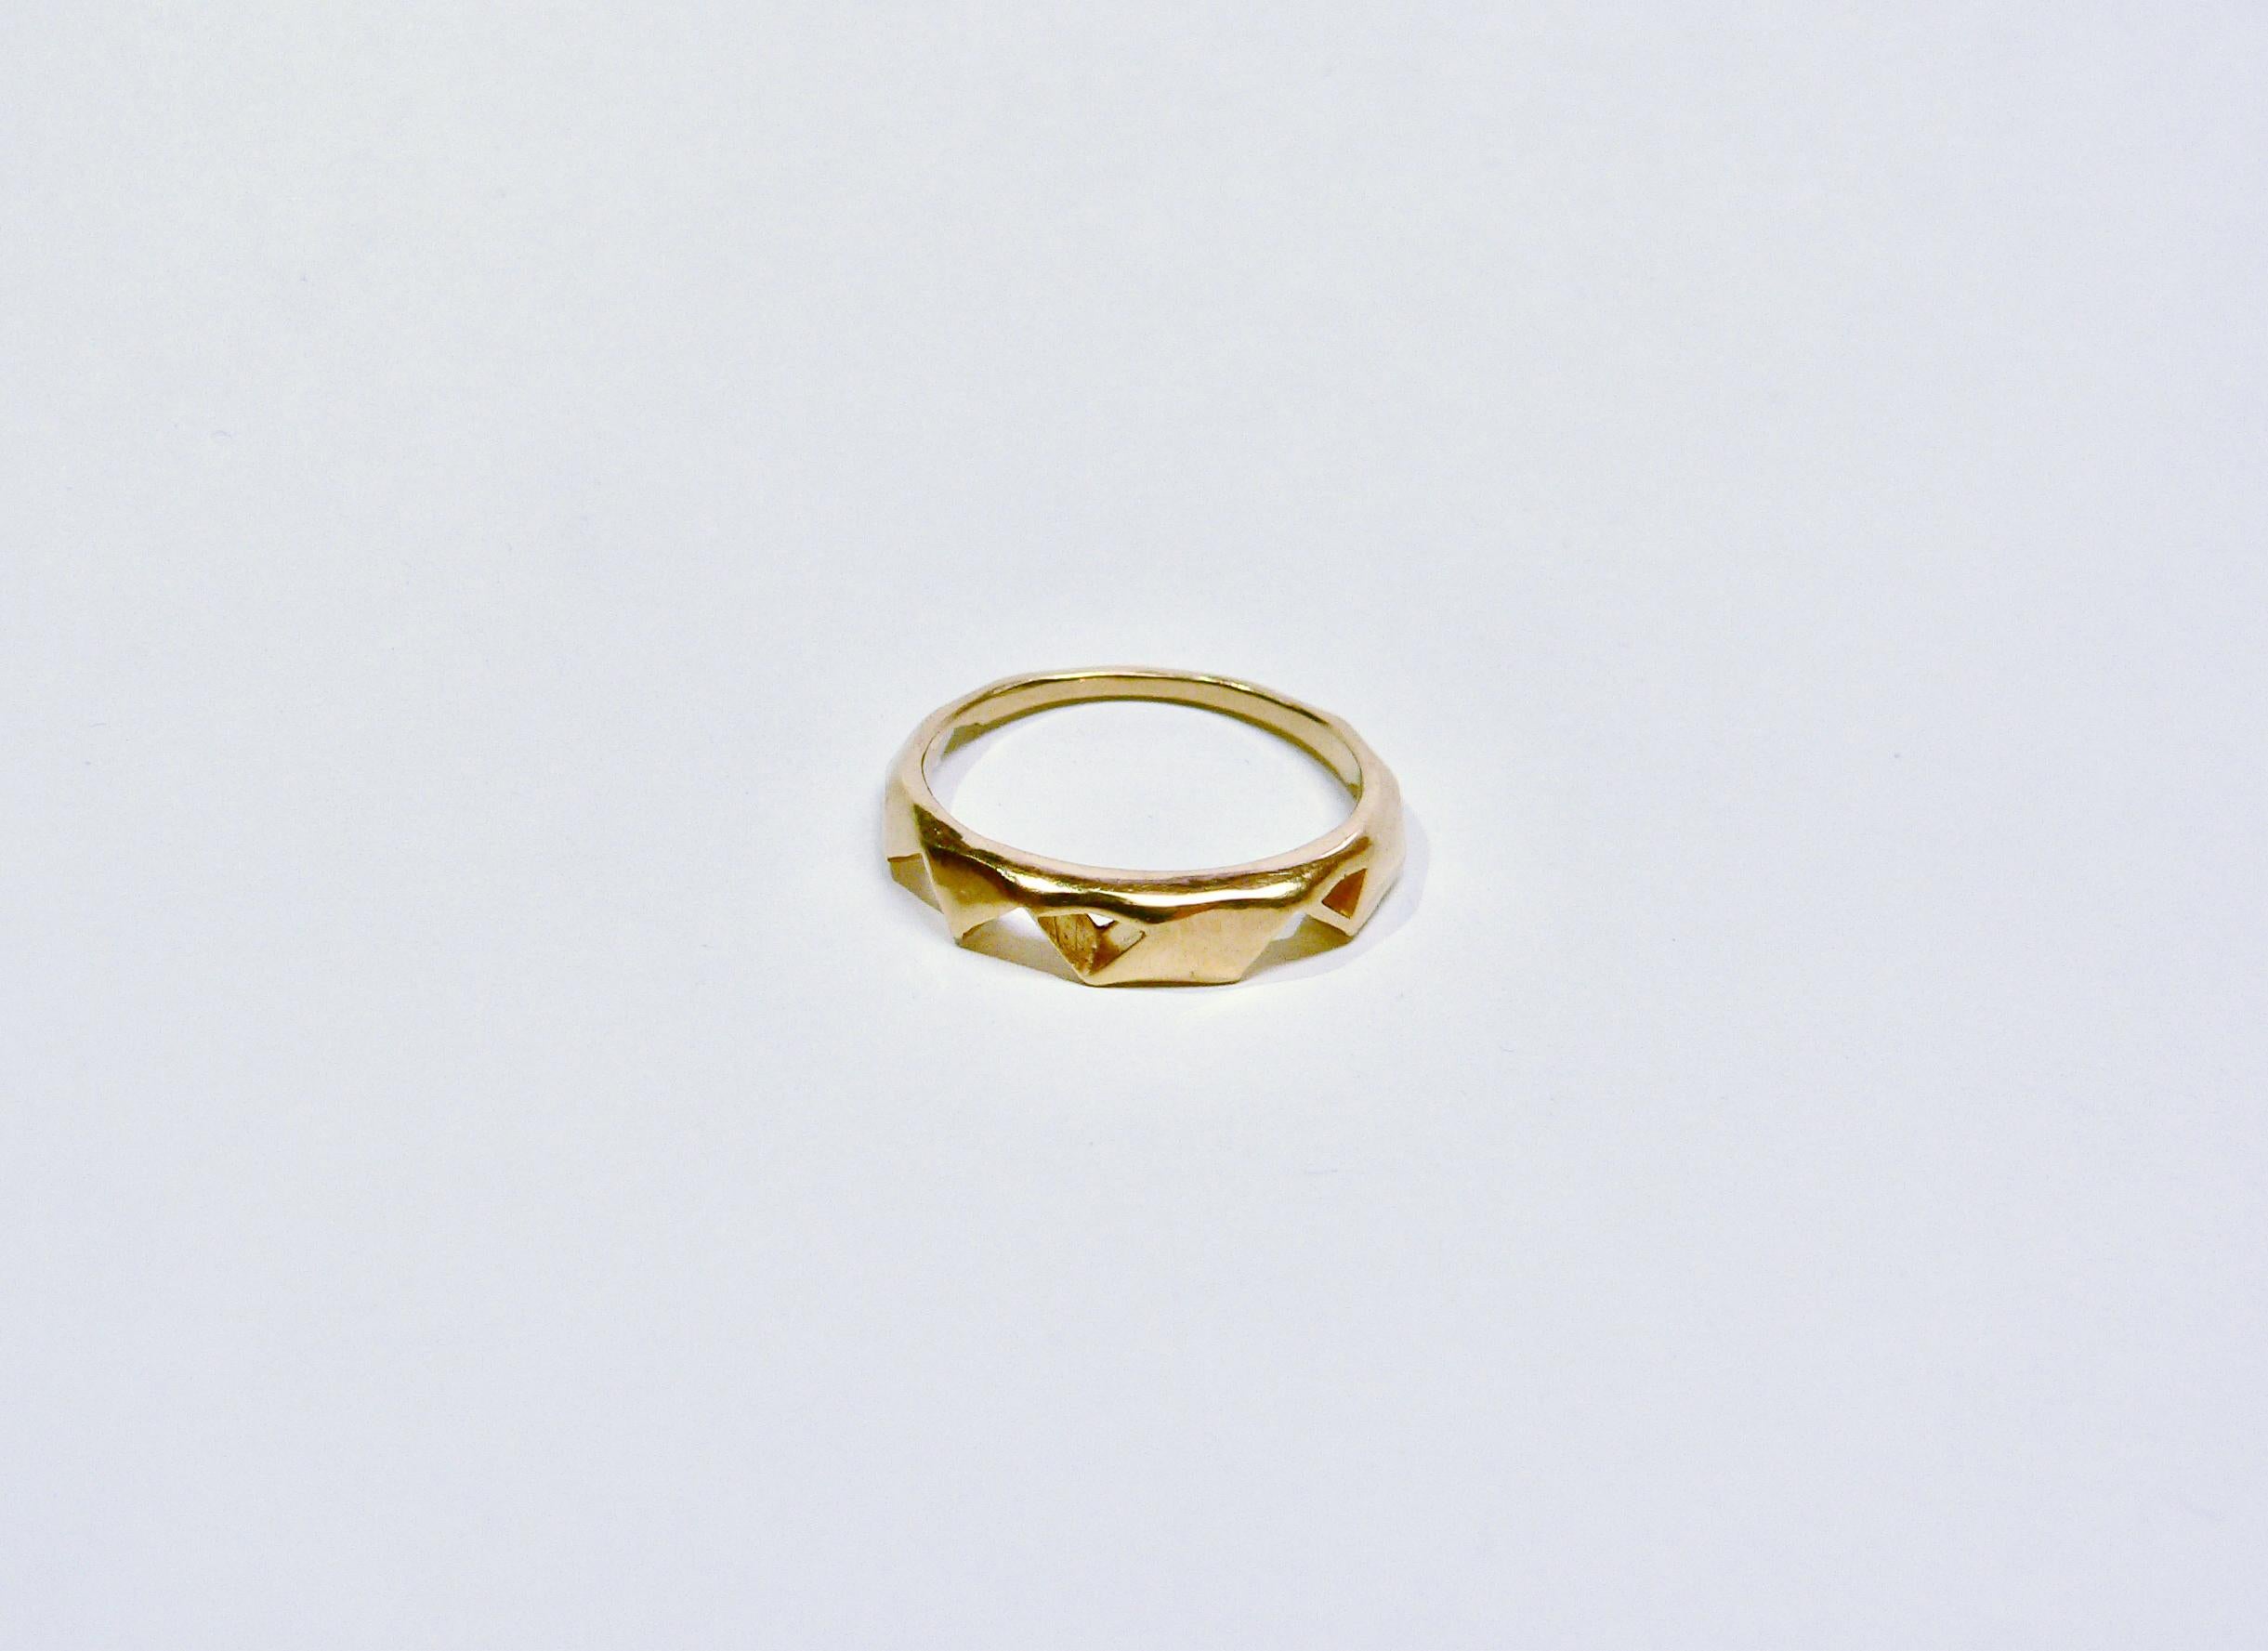 There are some geometric shapes, this ring os one of the geometry shapes. This Geometry ring, two rings are separately, and this can be used by each. This is type A ring. This ring is made of Sterling Silver with 18 karat yellow gold plated as one